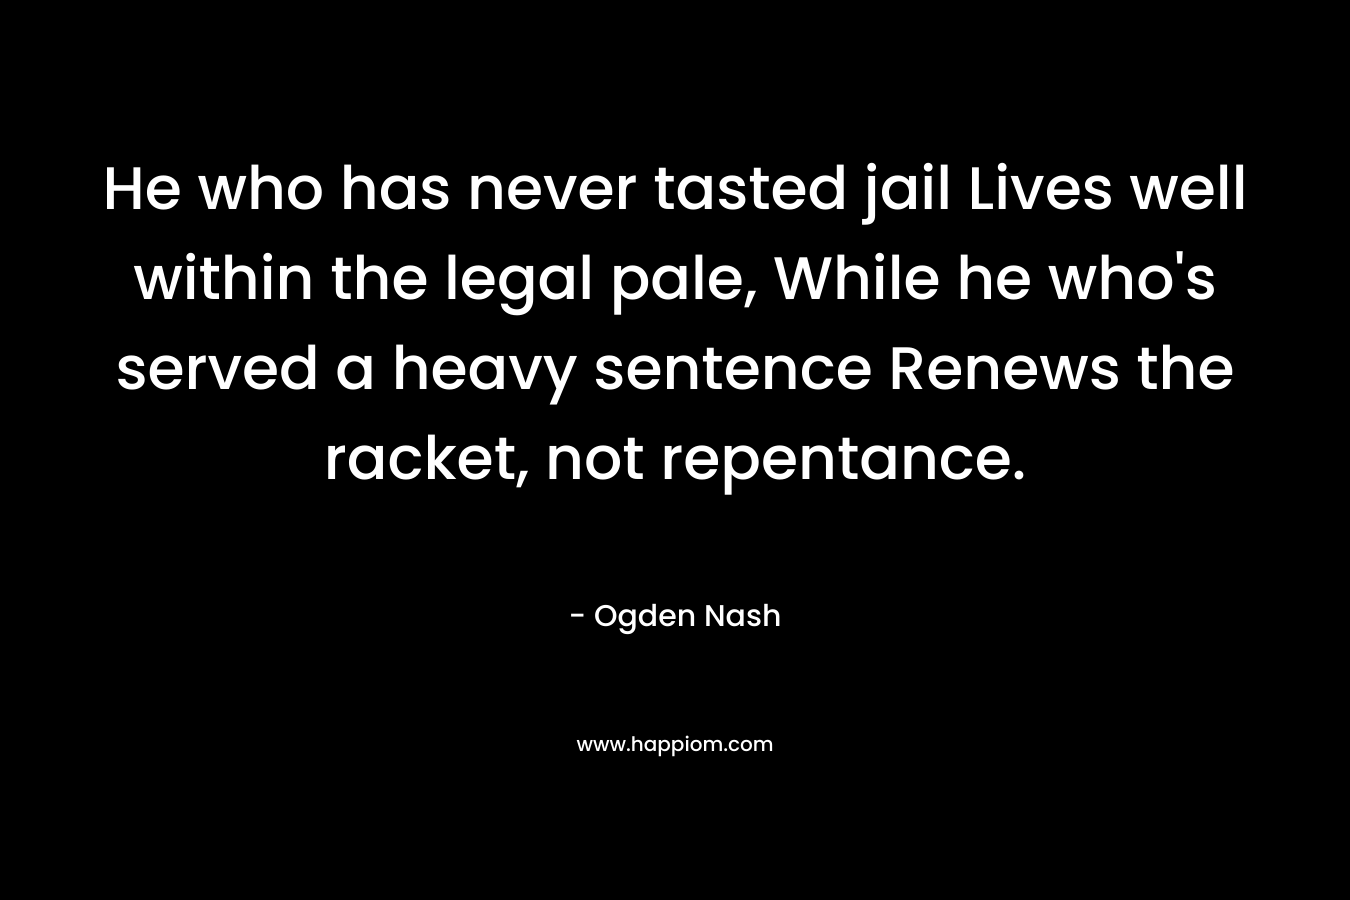 He who has never tasted jail Lives well within the legal pale, While he who's served a heavy sentence Renews the racket, not repentance.